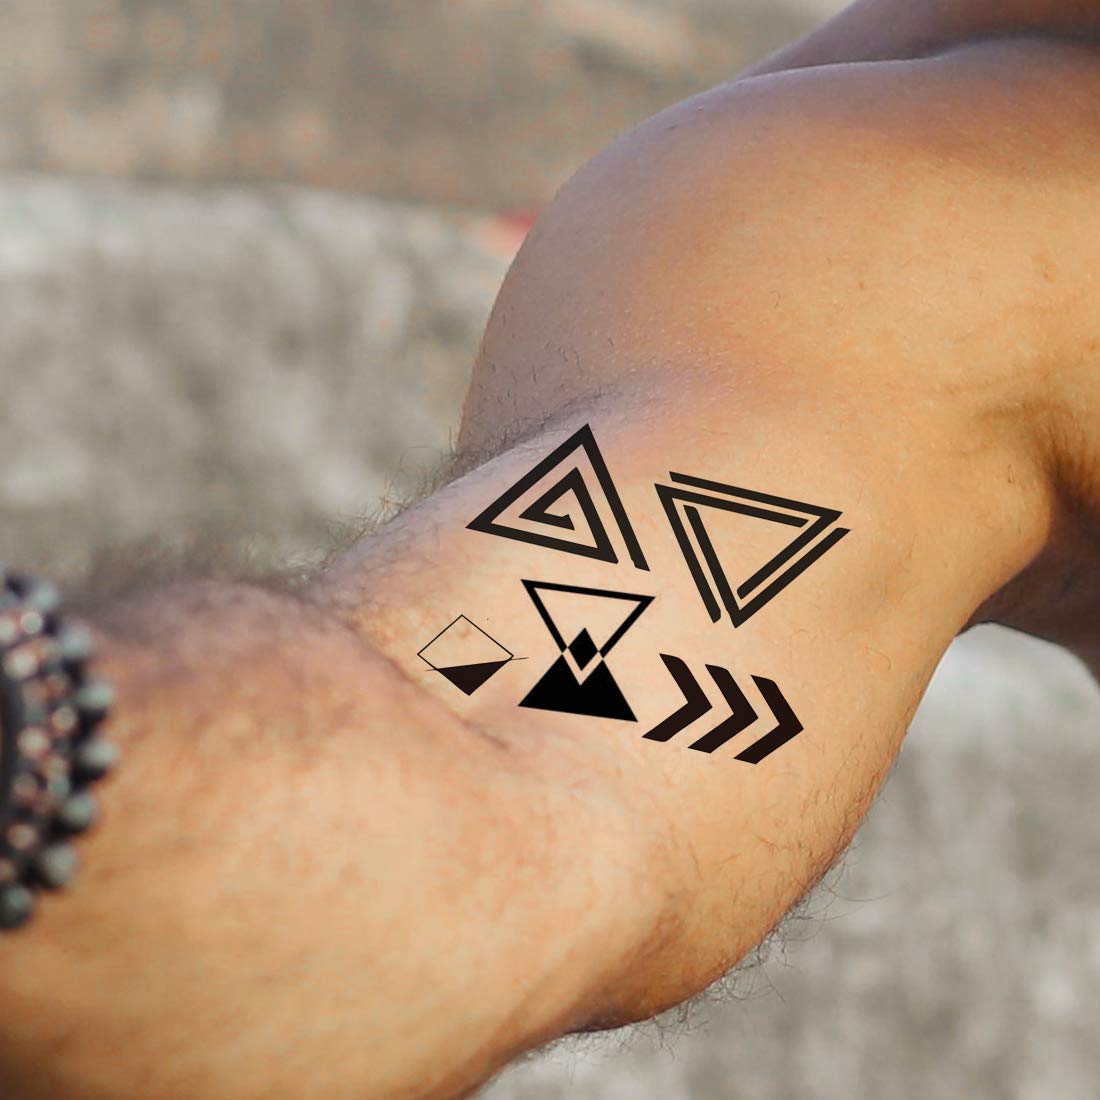 FANRUI Black Triangle Space Temporary Tattoos Set Geometric And Astronaut  Art Stickers For Women And Men With Water Transfer Space Man Z0403 From  Misihan09, $3.8 | DHgate.Com